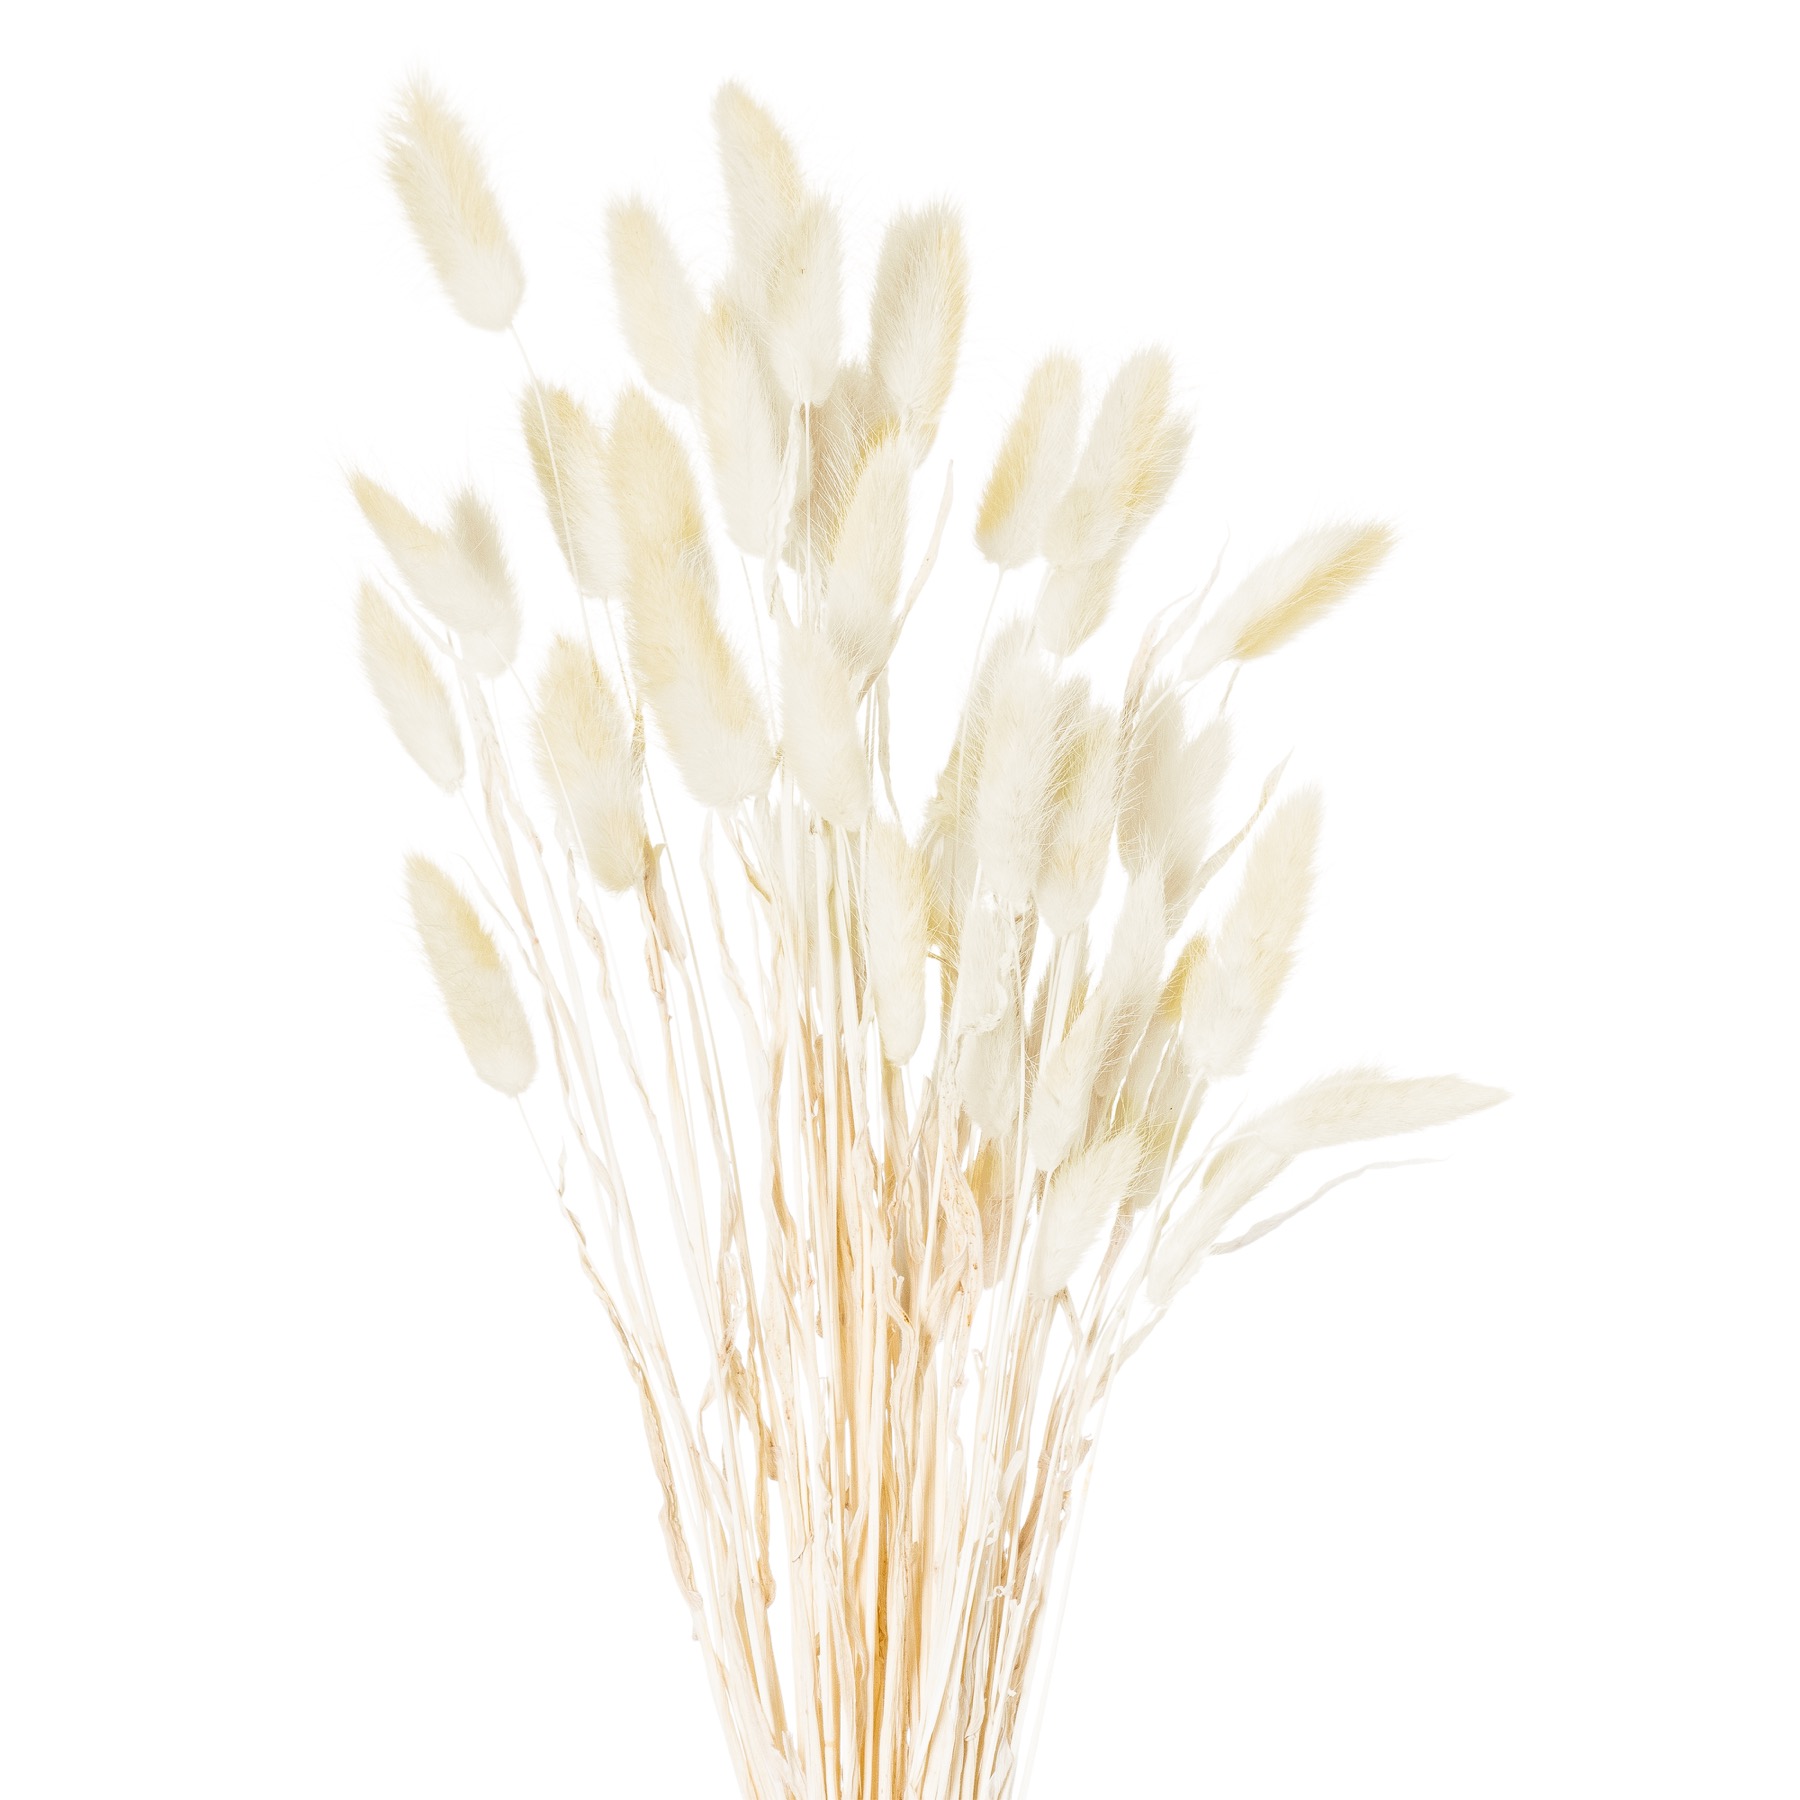 Dried Natural Bunny Tail Bunch Of 40 - Image 1